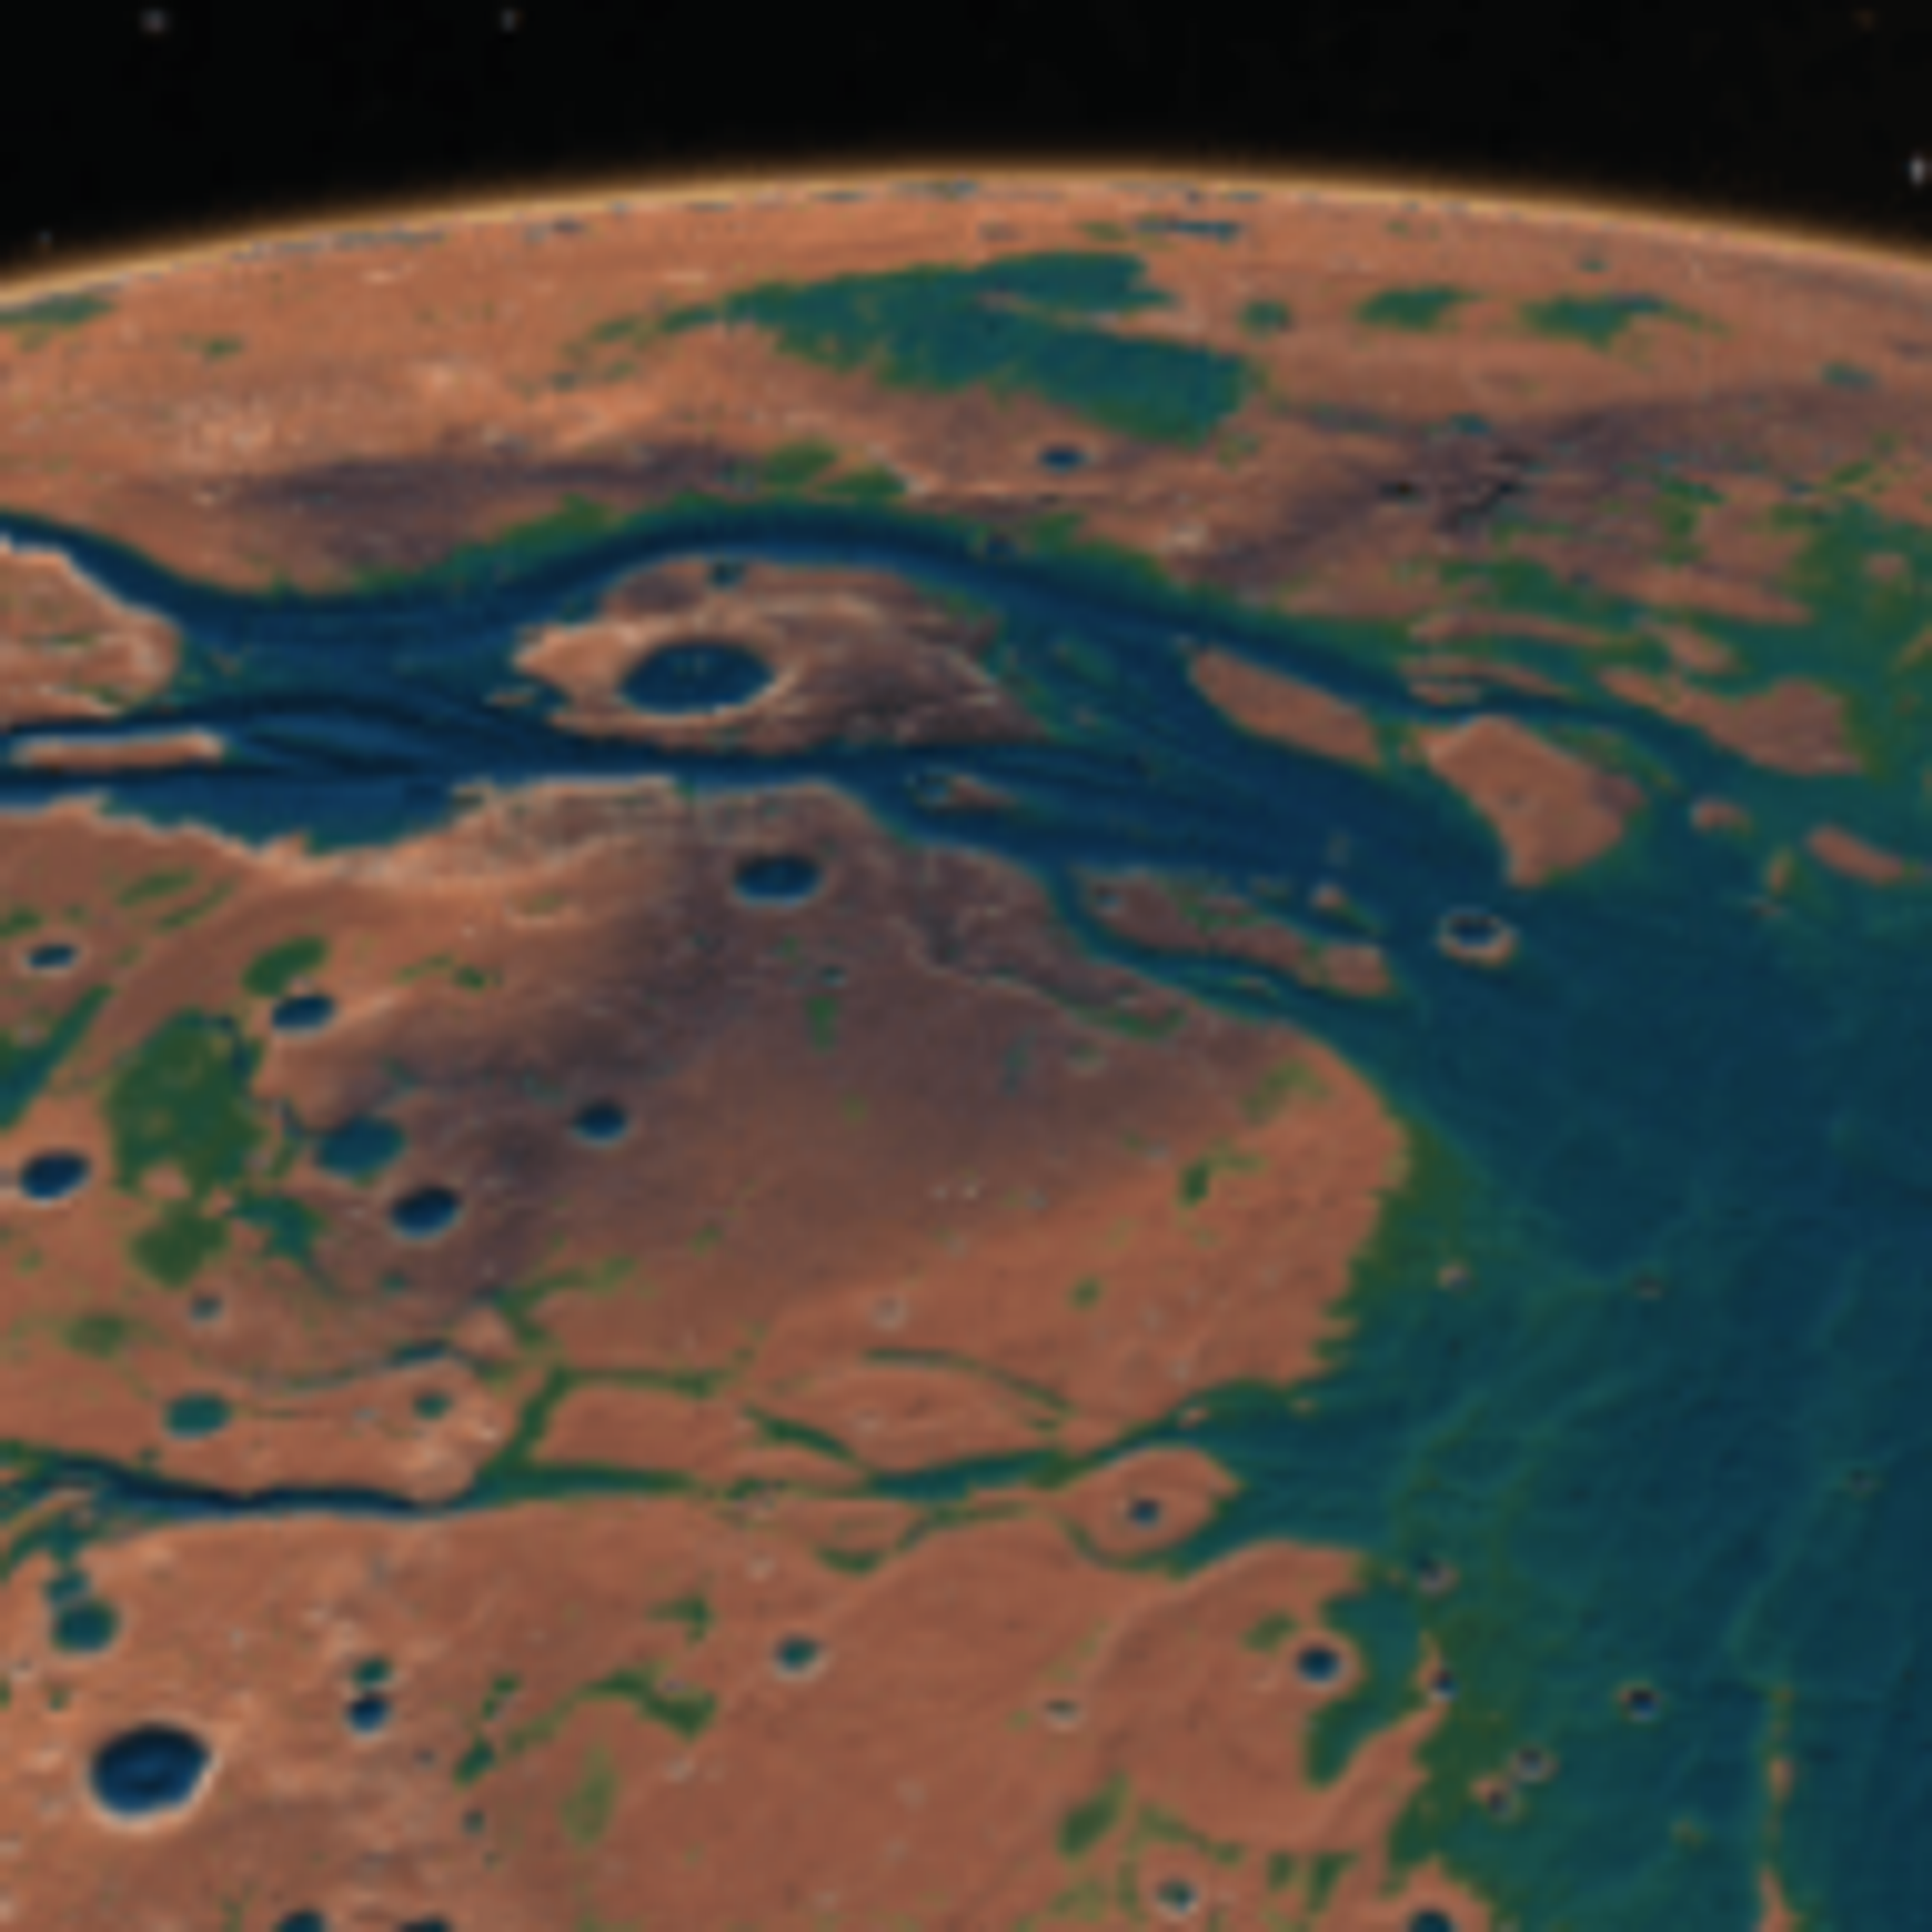 How to terraform Mars for $10b in 10 years